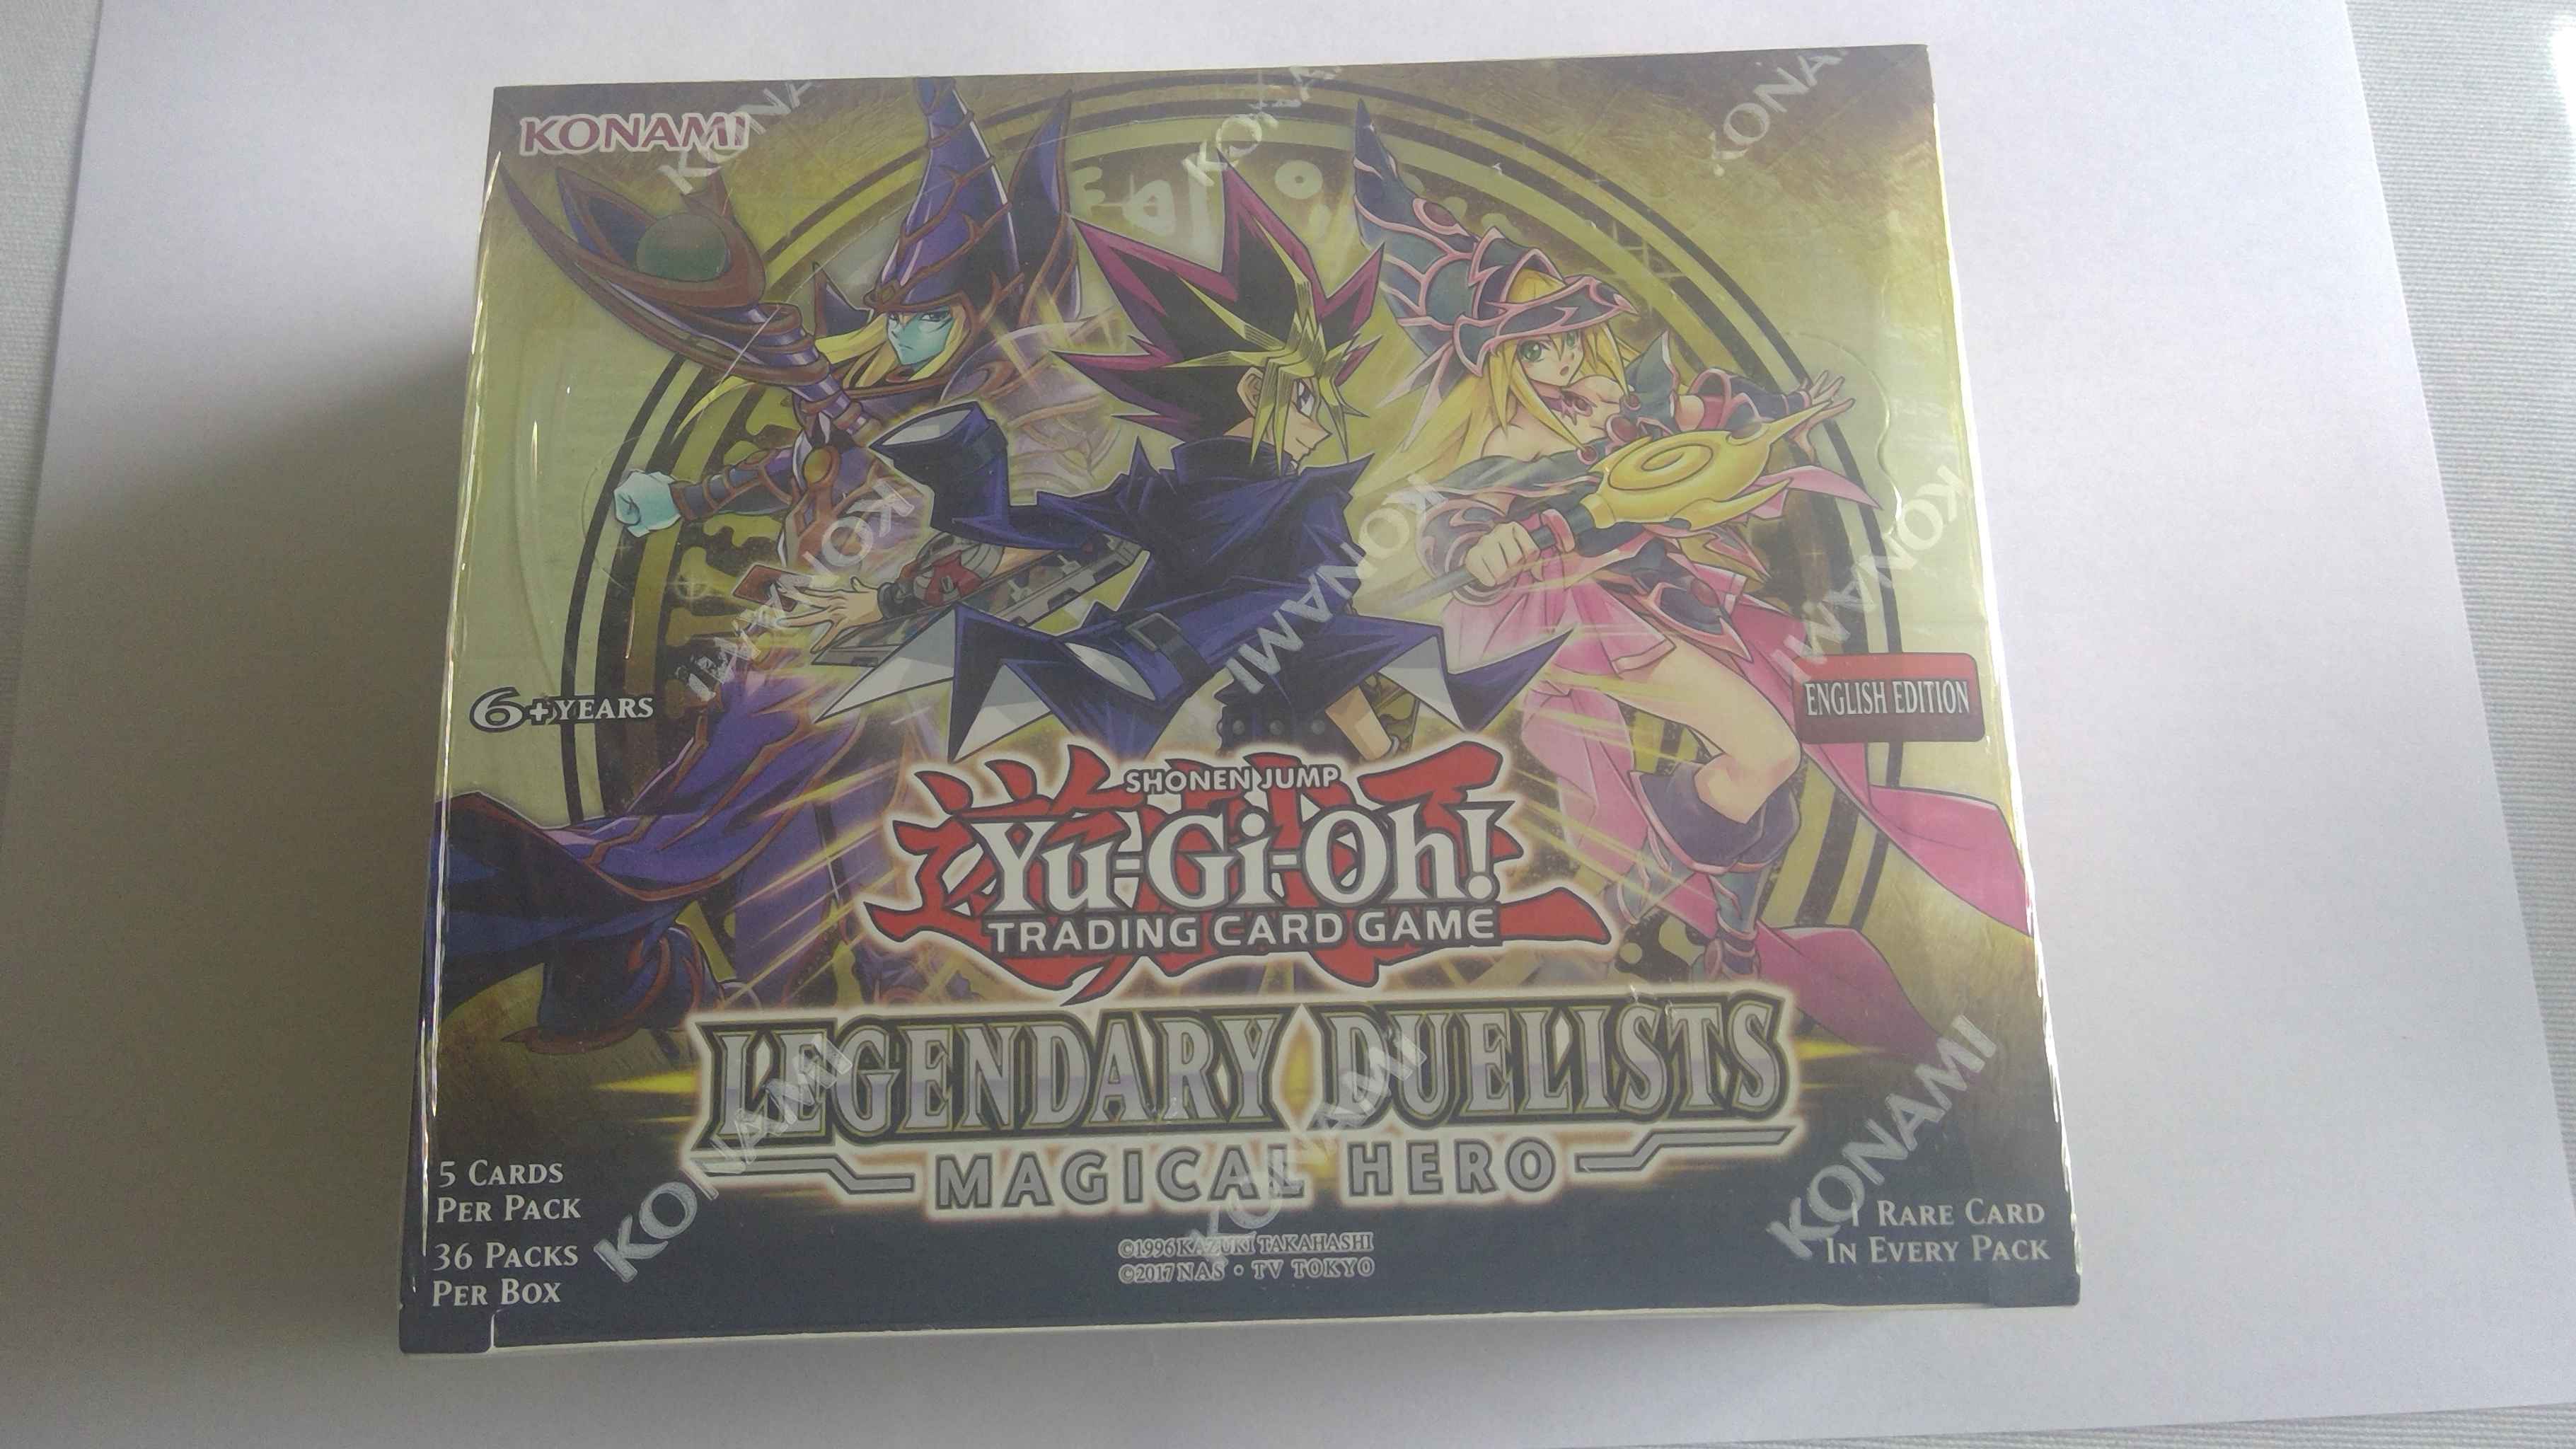 YUGIOH LEGENDARY DUELISTS MAGICAL HERO BOOSTER BOX FACTORY SEALED 36 packs